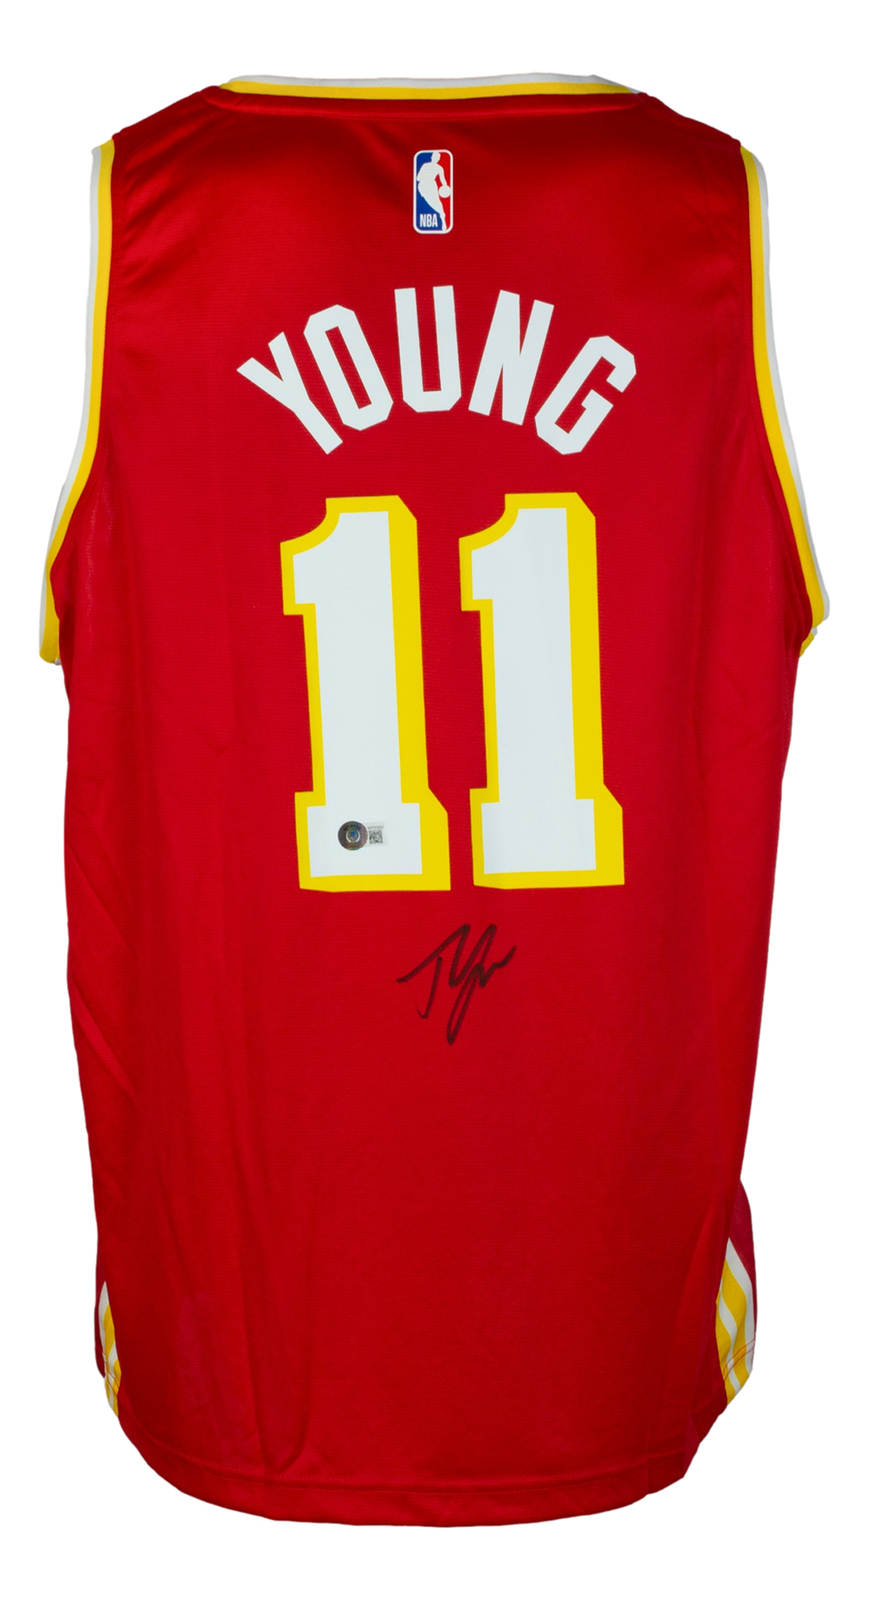 Primary image for Trae Young Signed Atlanta Hawks Red Fanatics Basketball Jersey BAS ITP